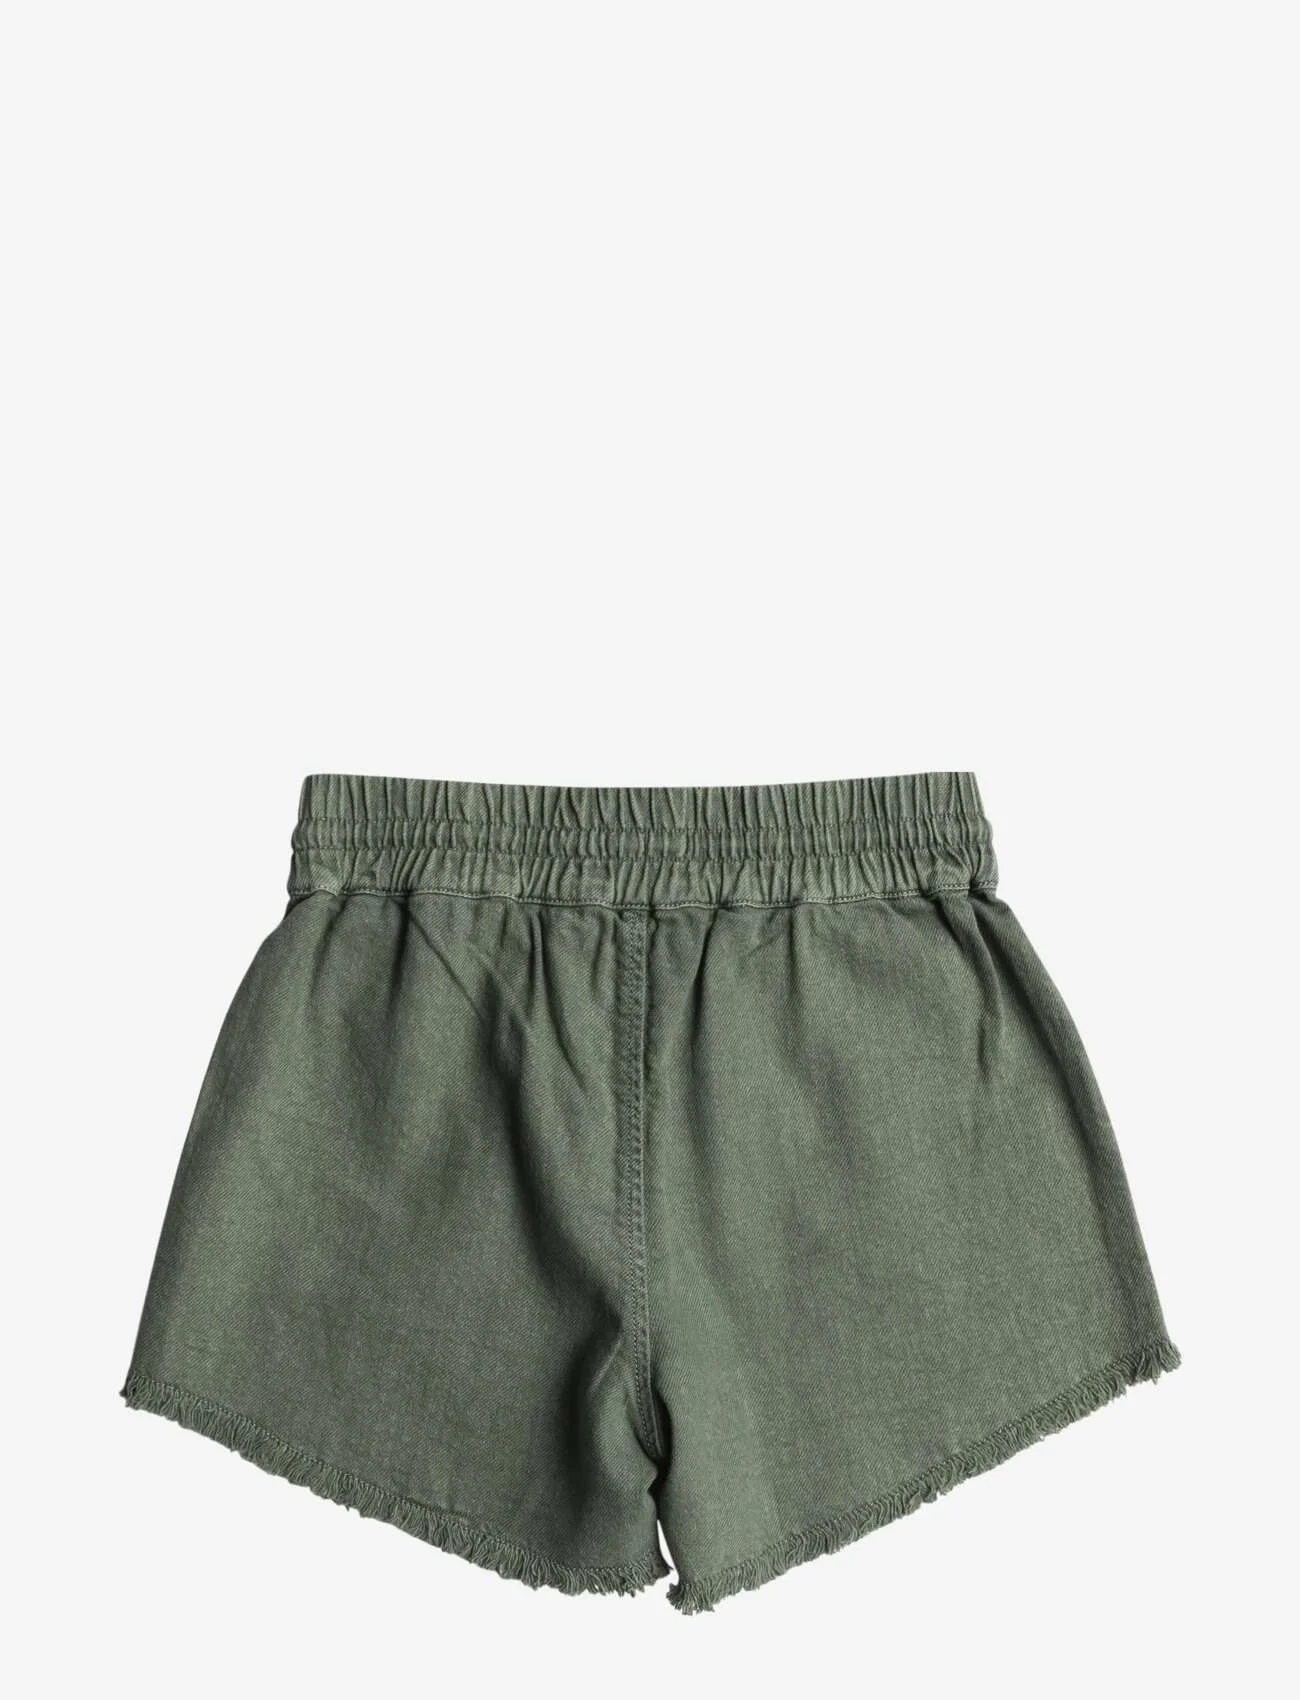 Roxy - SCENIC ROUTE TWILL RG - sportshorts - agave green - 1